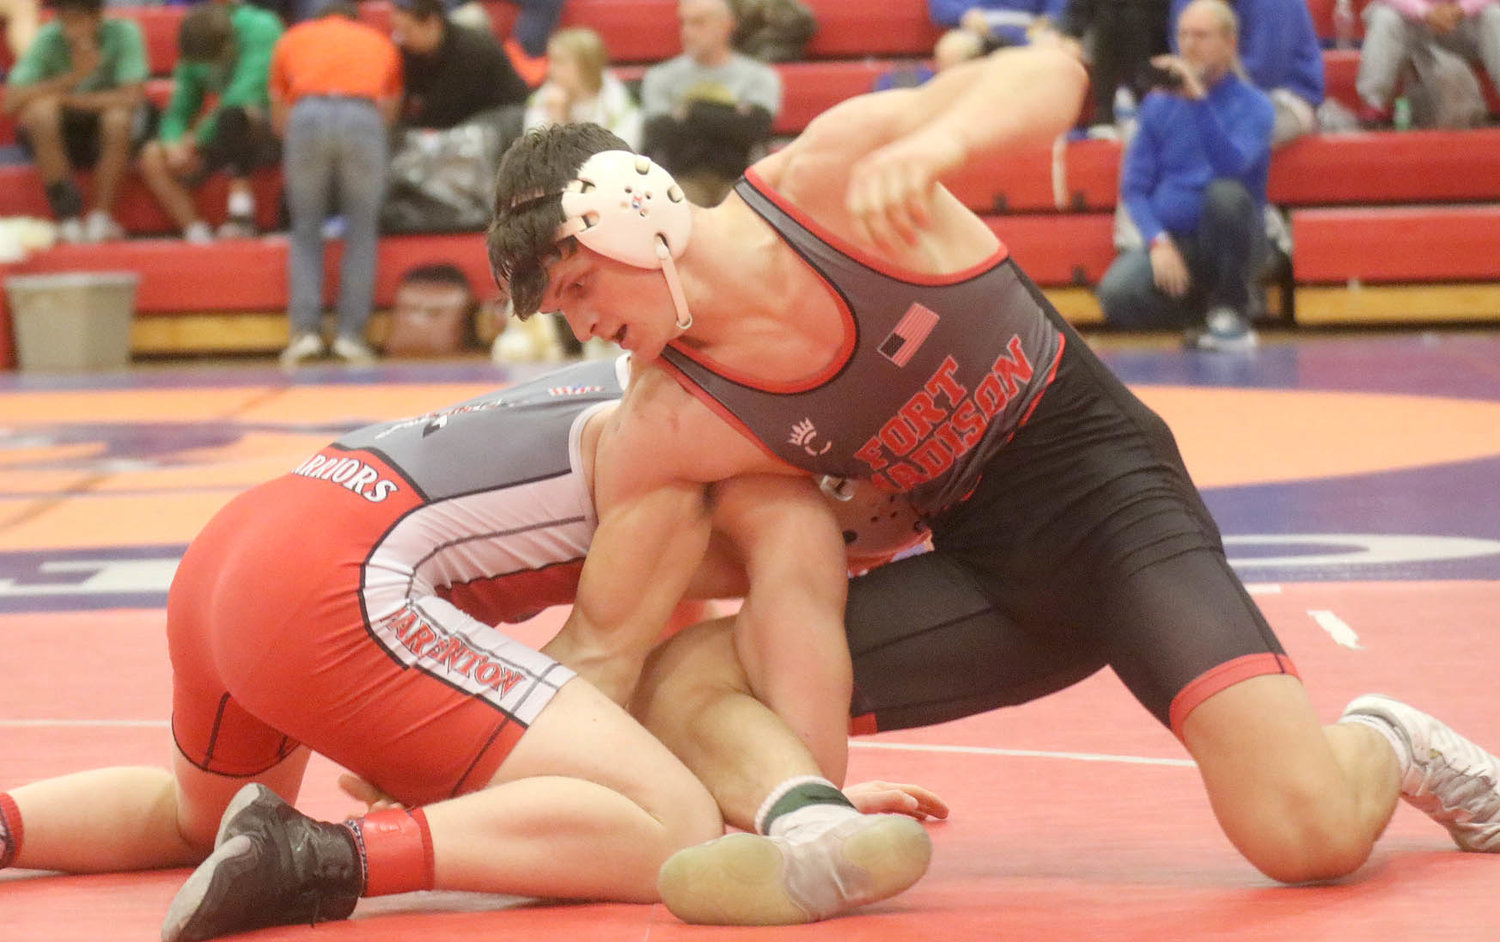 Fort Madison's Jake McGowan looks for position against Andrew Sommer, of Warrenton, Mo., at the Wentzville Invitational Saturday in Missour. McGowan swept through the 182 lb bracket to take first at the meet. Photo by Chuck Vandenberg/PCC